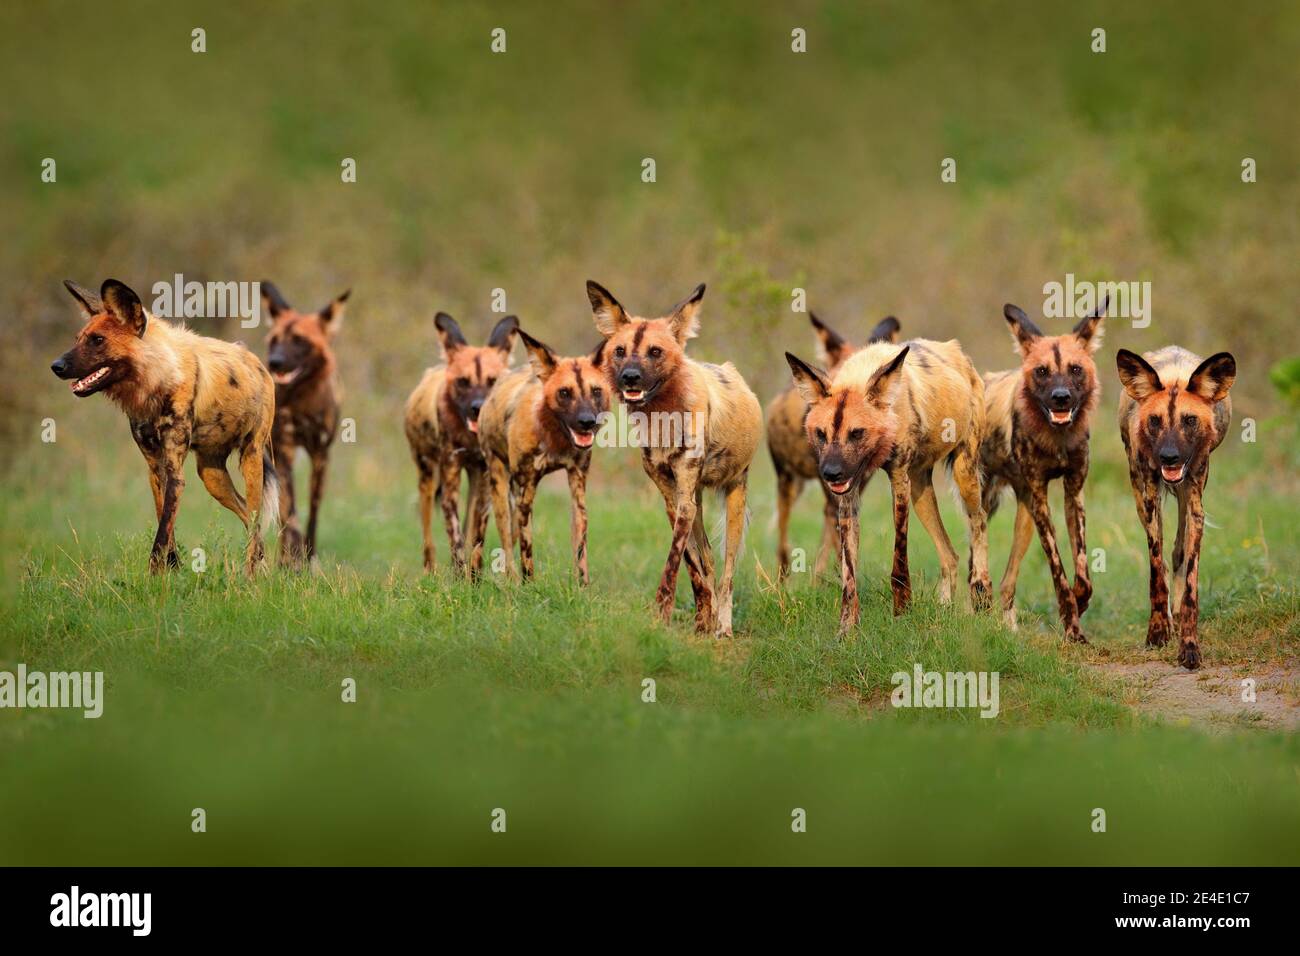 Wild dog, pack walking in the forest, Okavango detla, Botseana in Africa. Dangerous spotted animal with big ears. Hunting painted dog on African safar Stock Photo